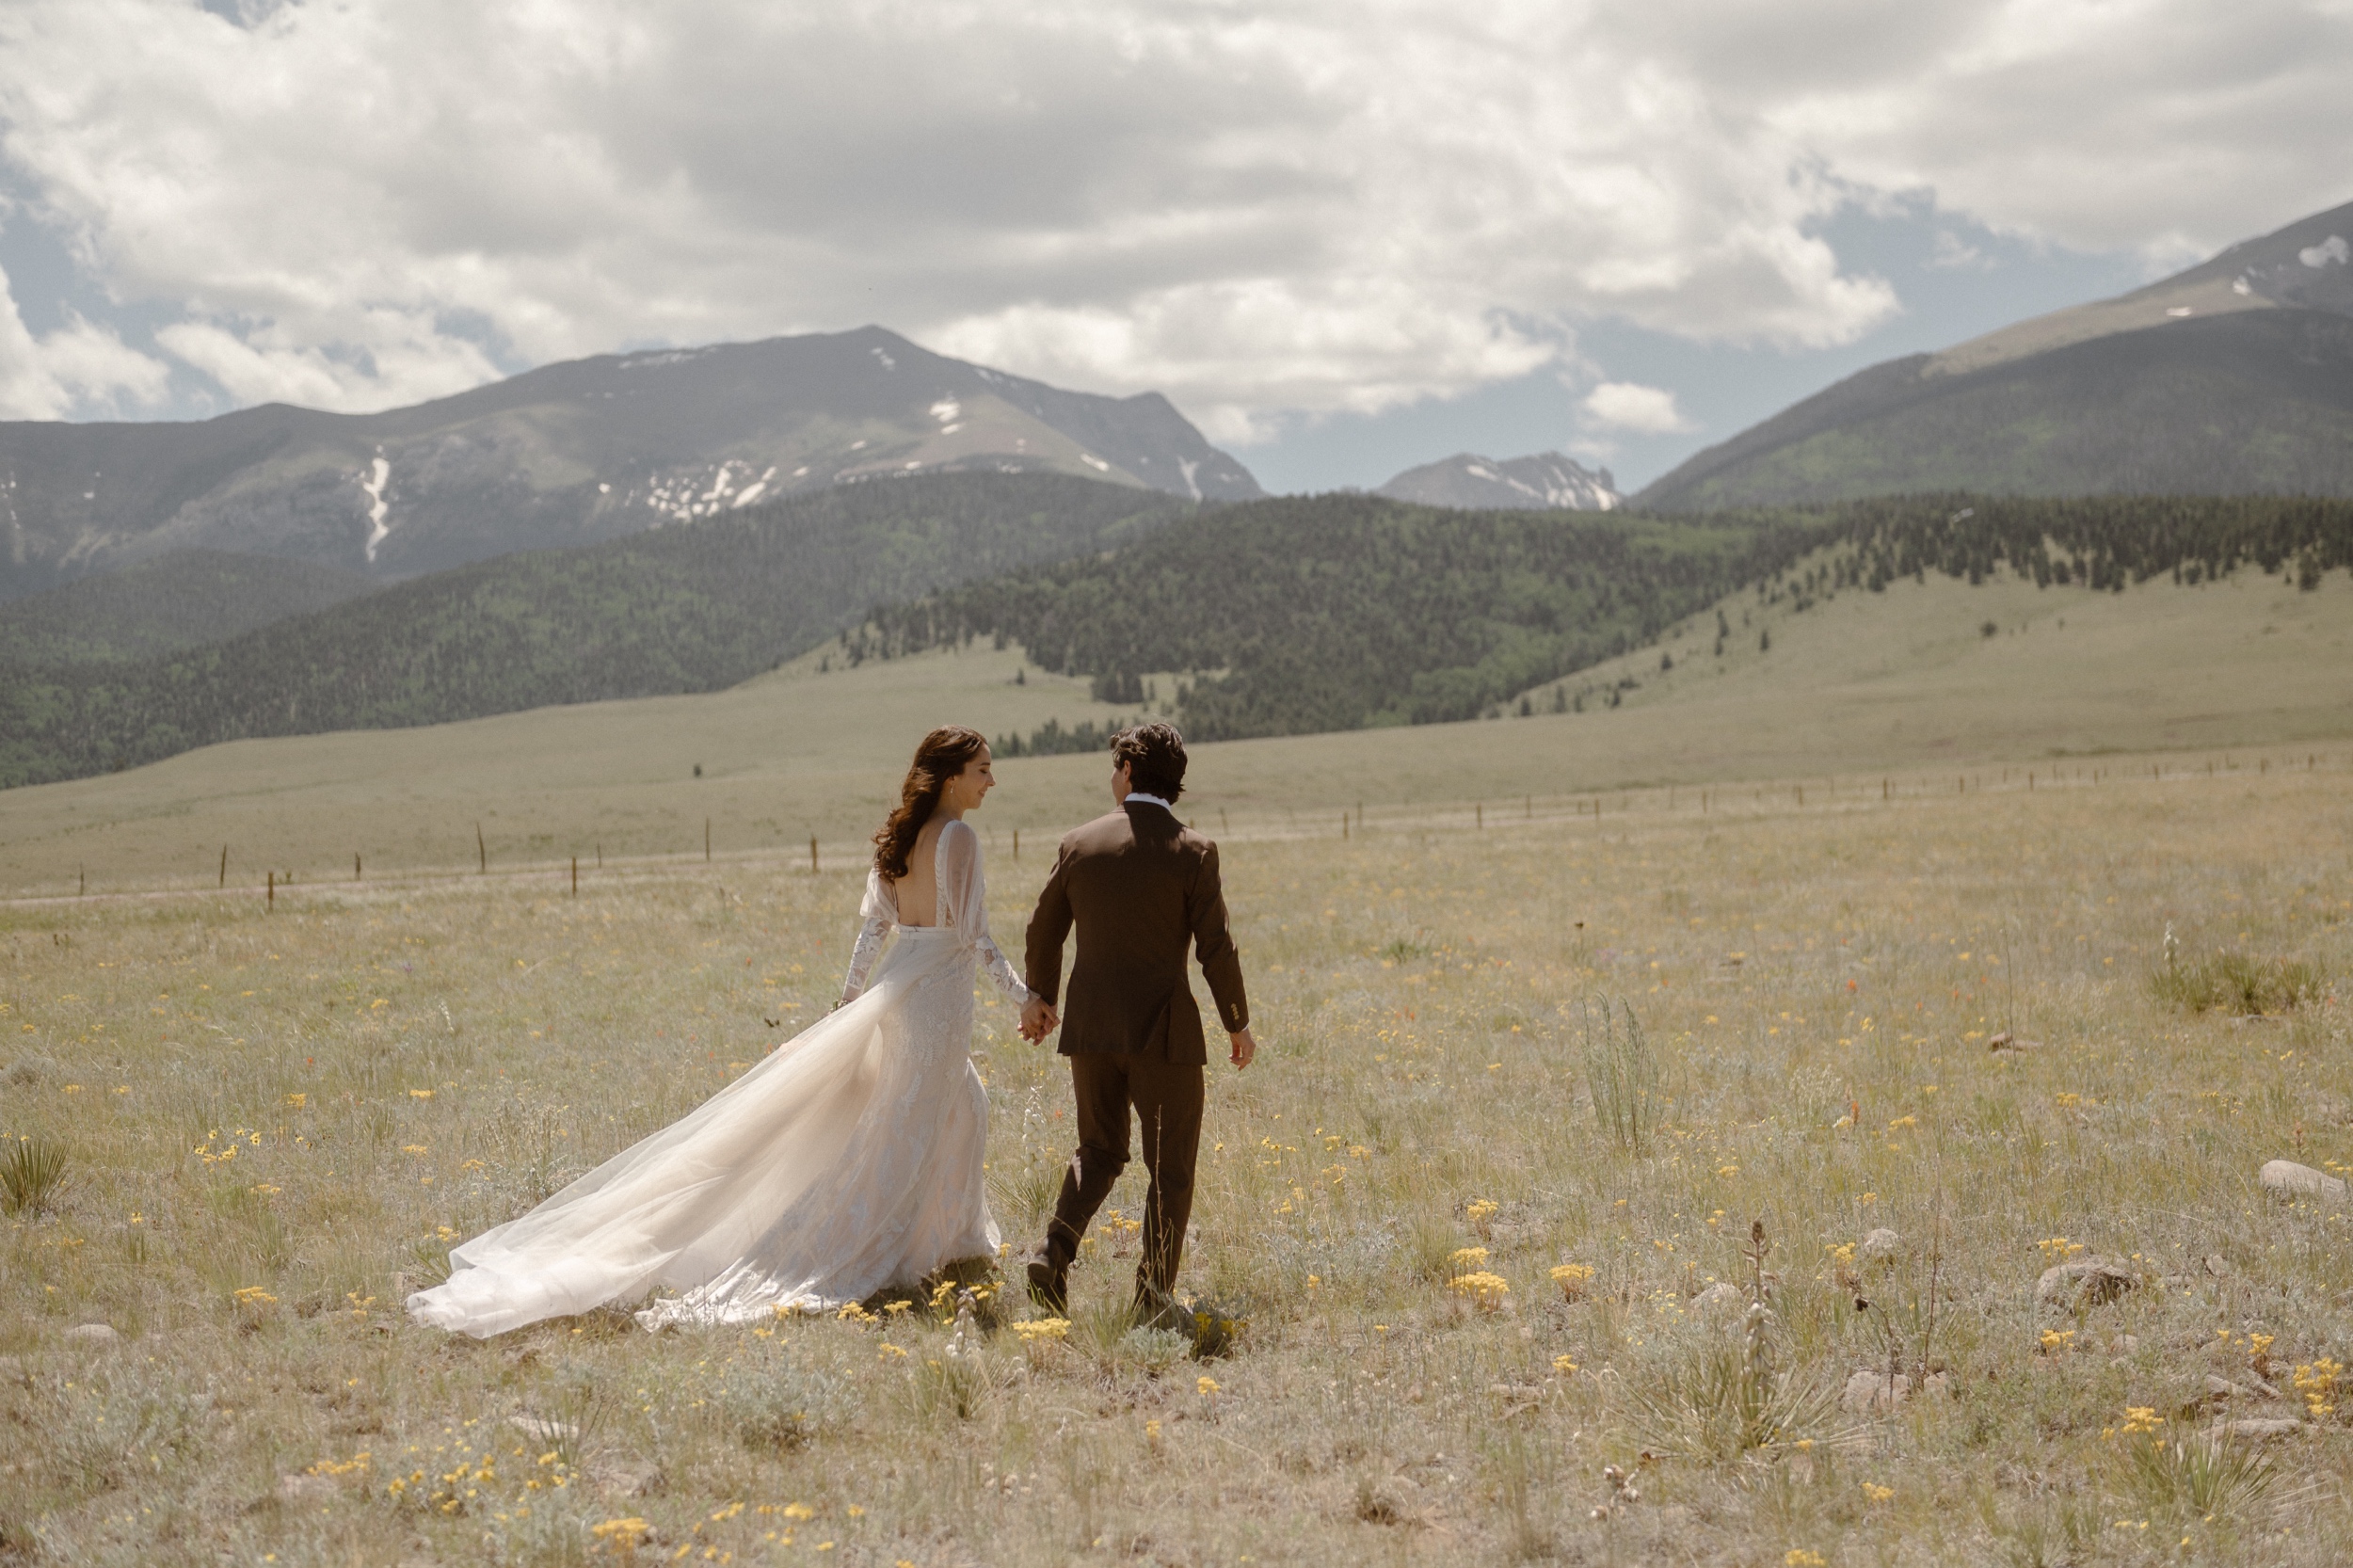 A bride and a groom walk away from the camera while they hold hands in a grassy field with mountains in the background. Photo by Colorado wedding photographer Ashley Joyce.